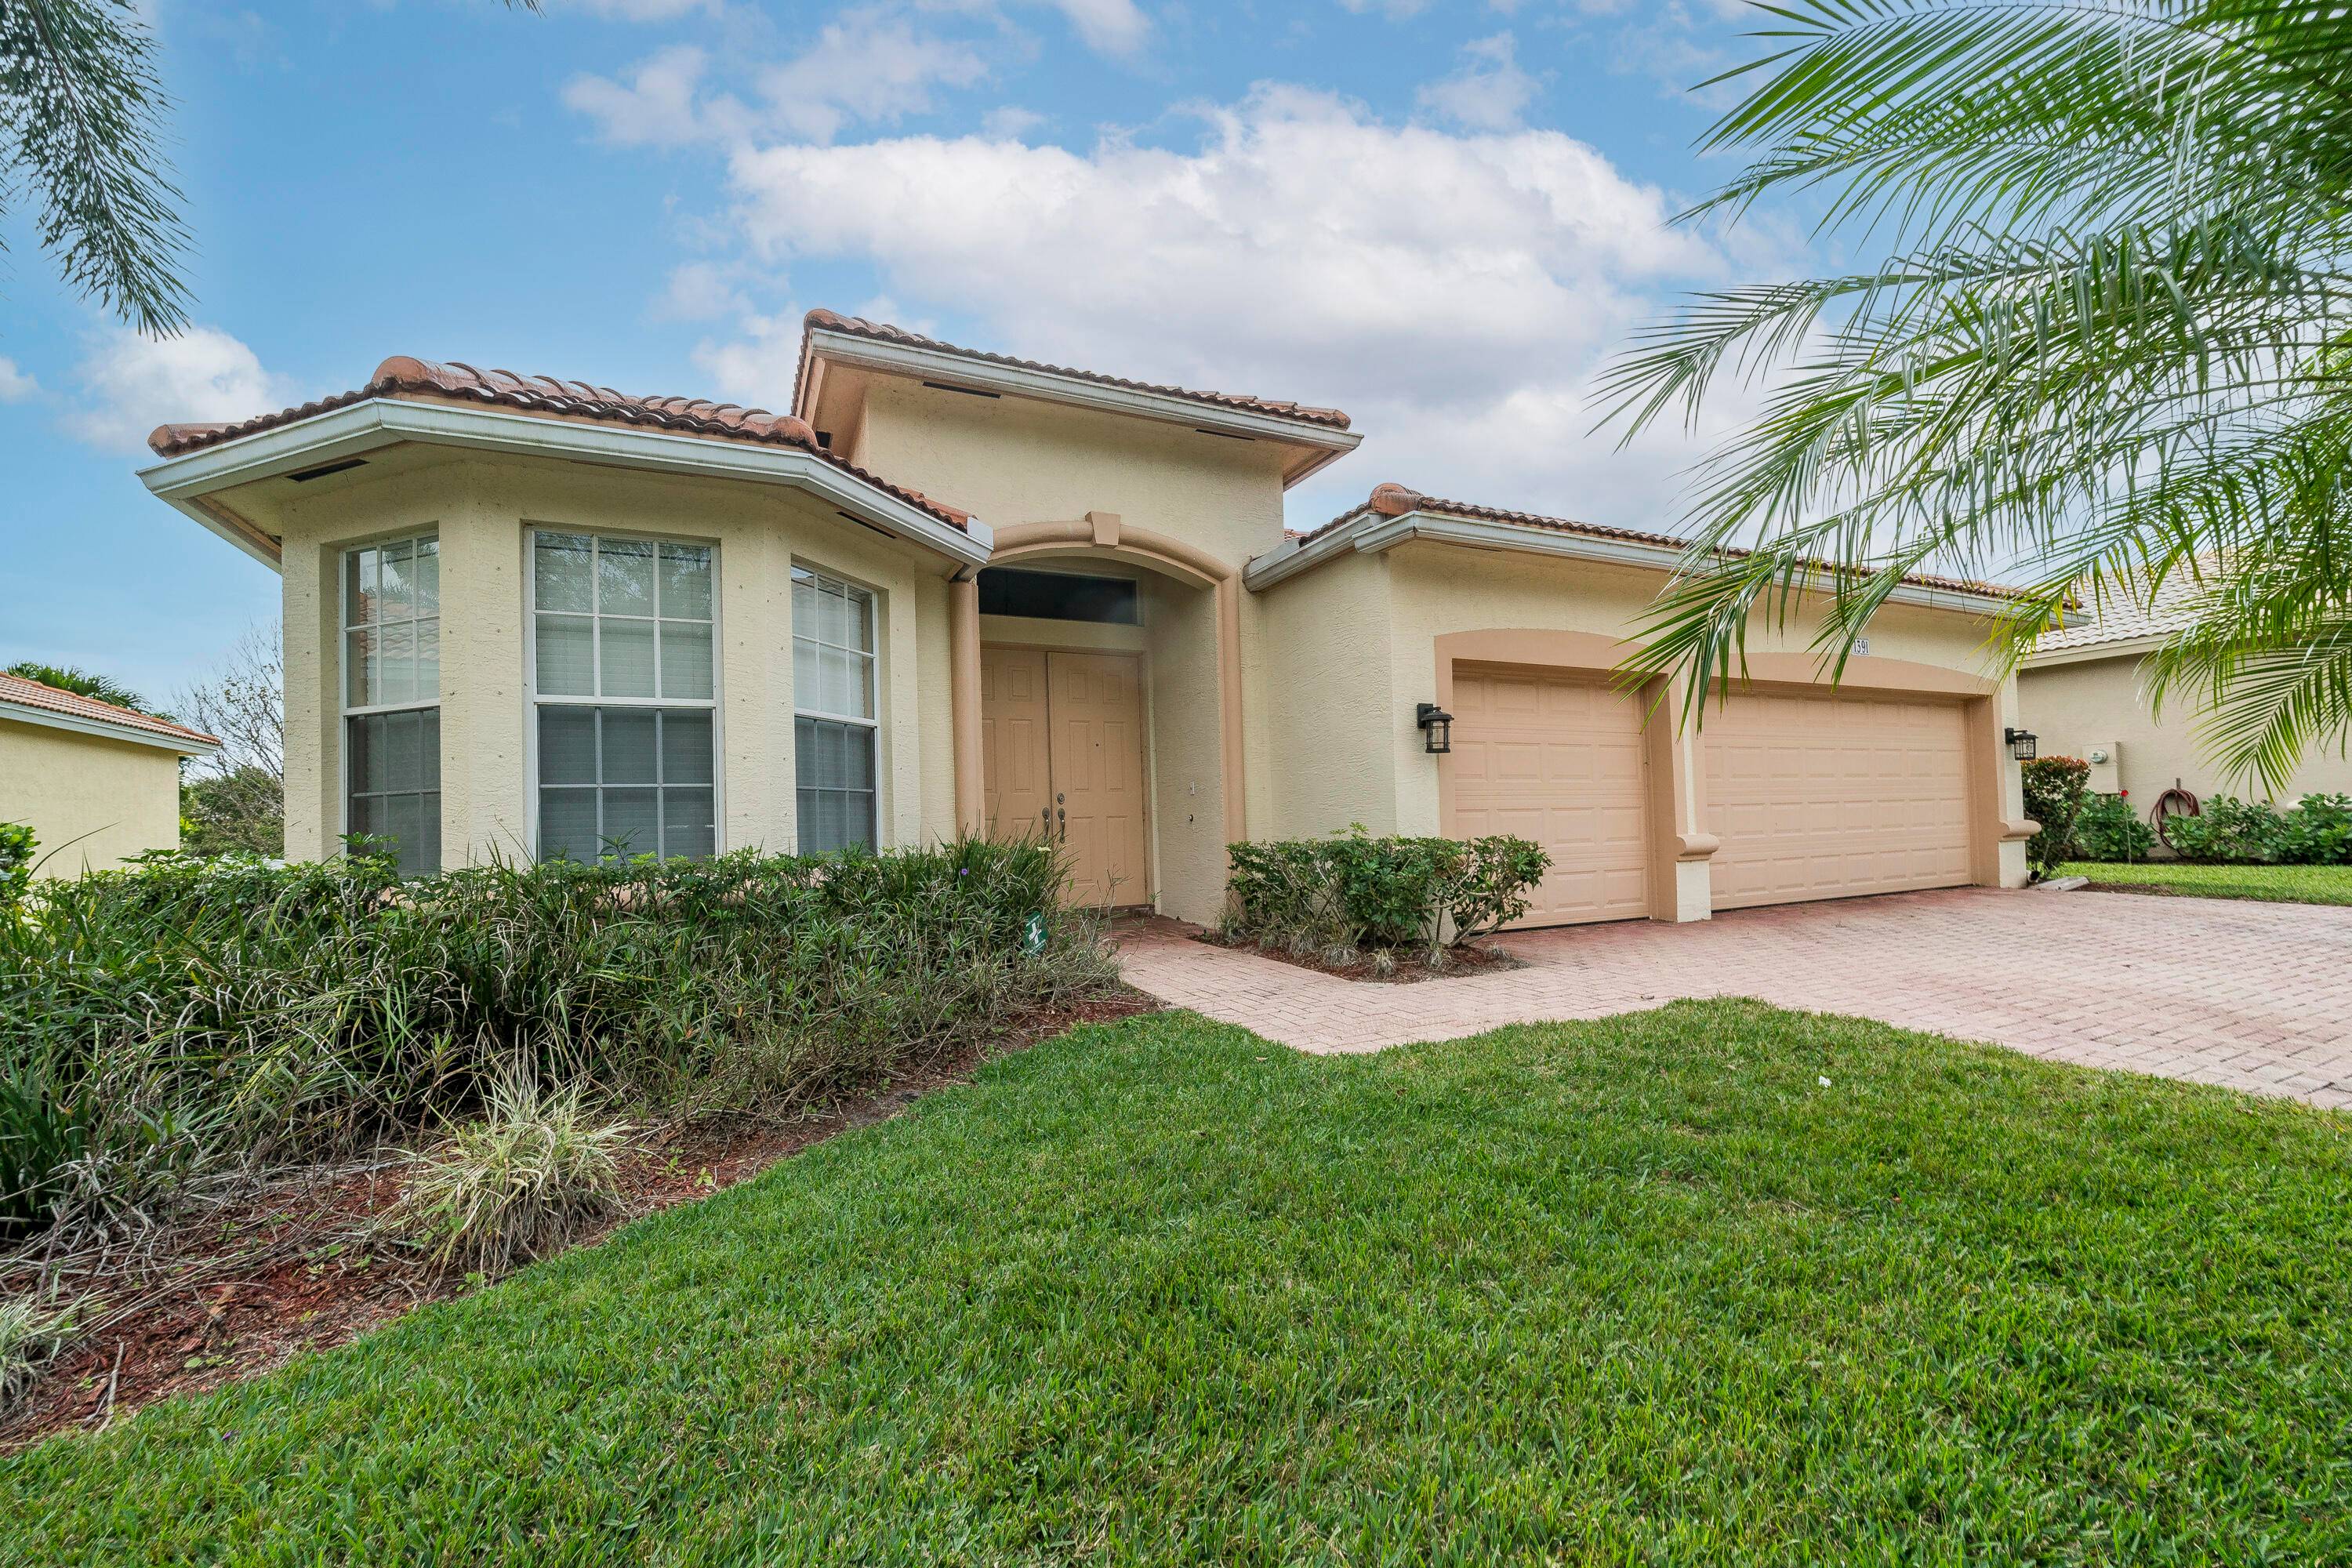 Stunning ESTATE HOME with spacious rooms a wonderful flowing floor plan and much, much more !